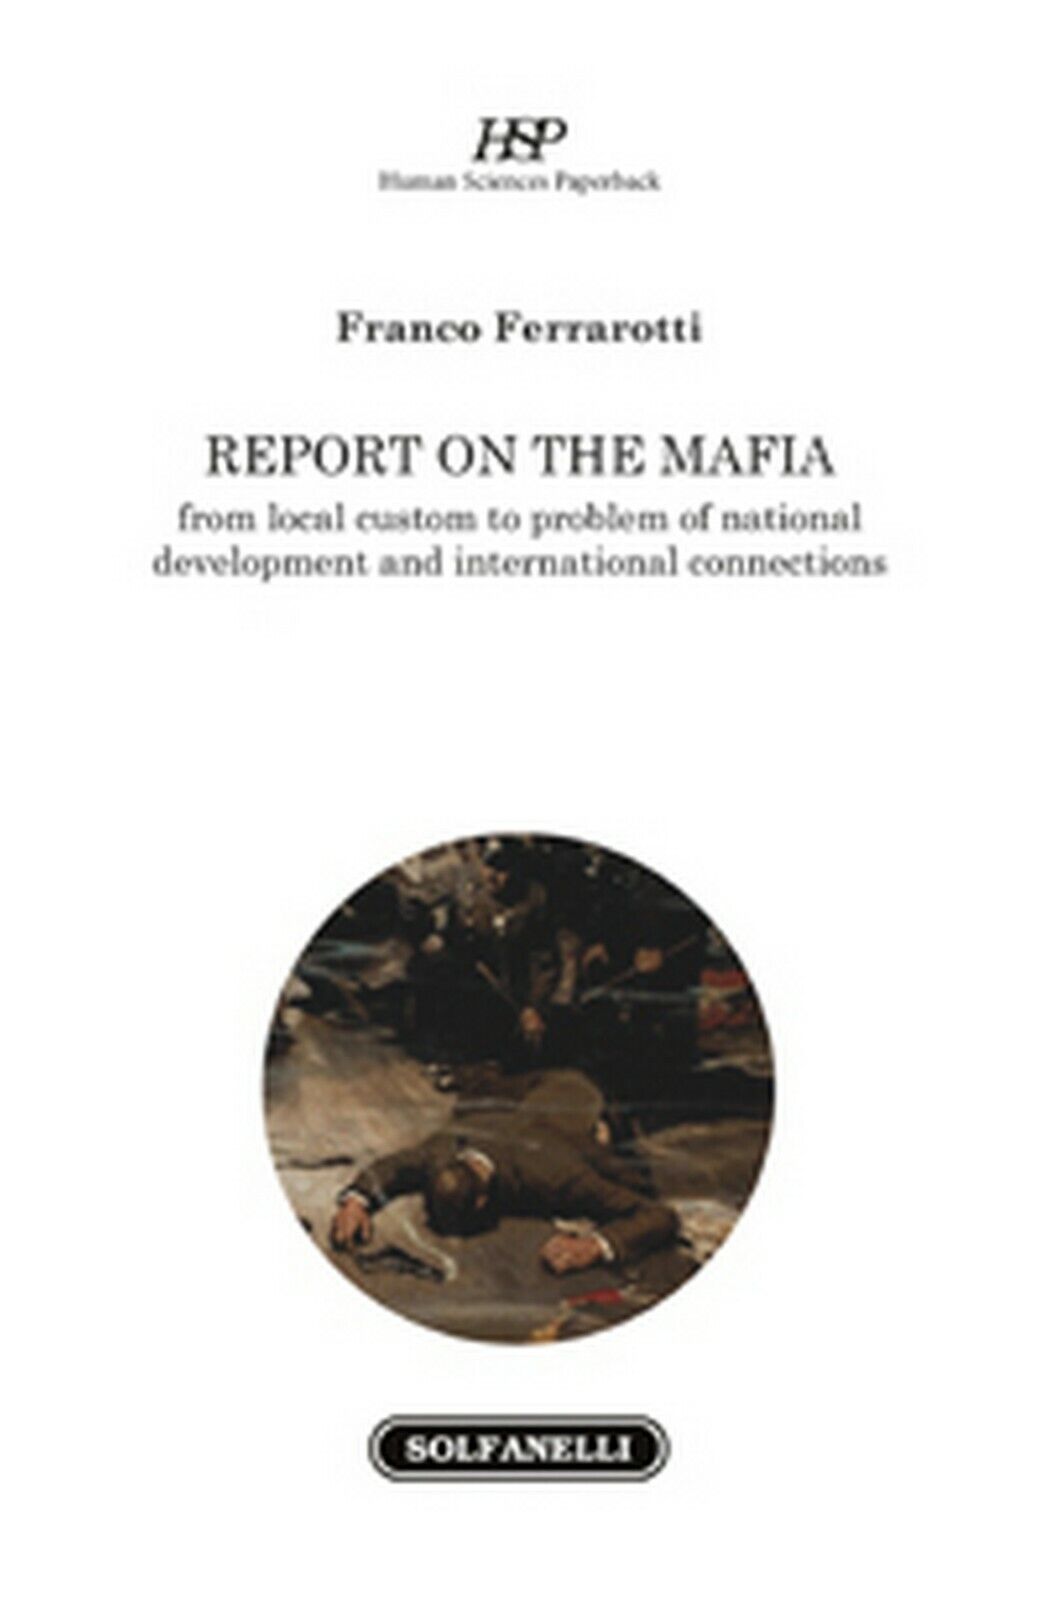 REPORT ON THE MAFIA from local custom to problem of national development and... libro usato